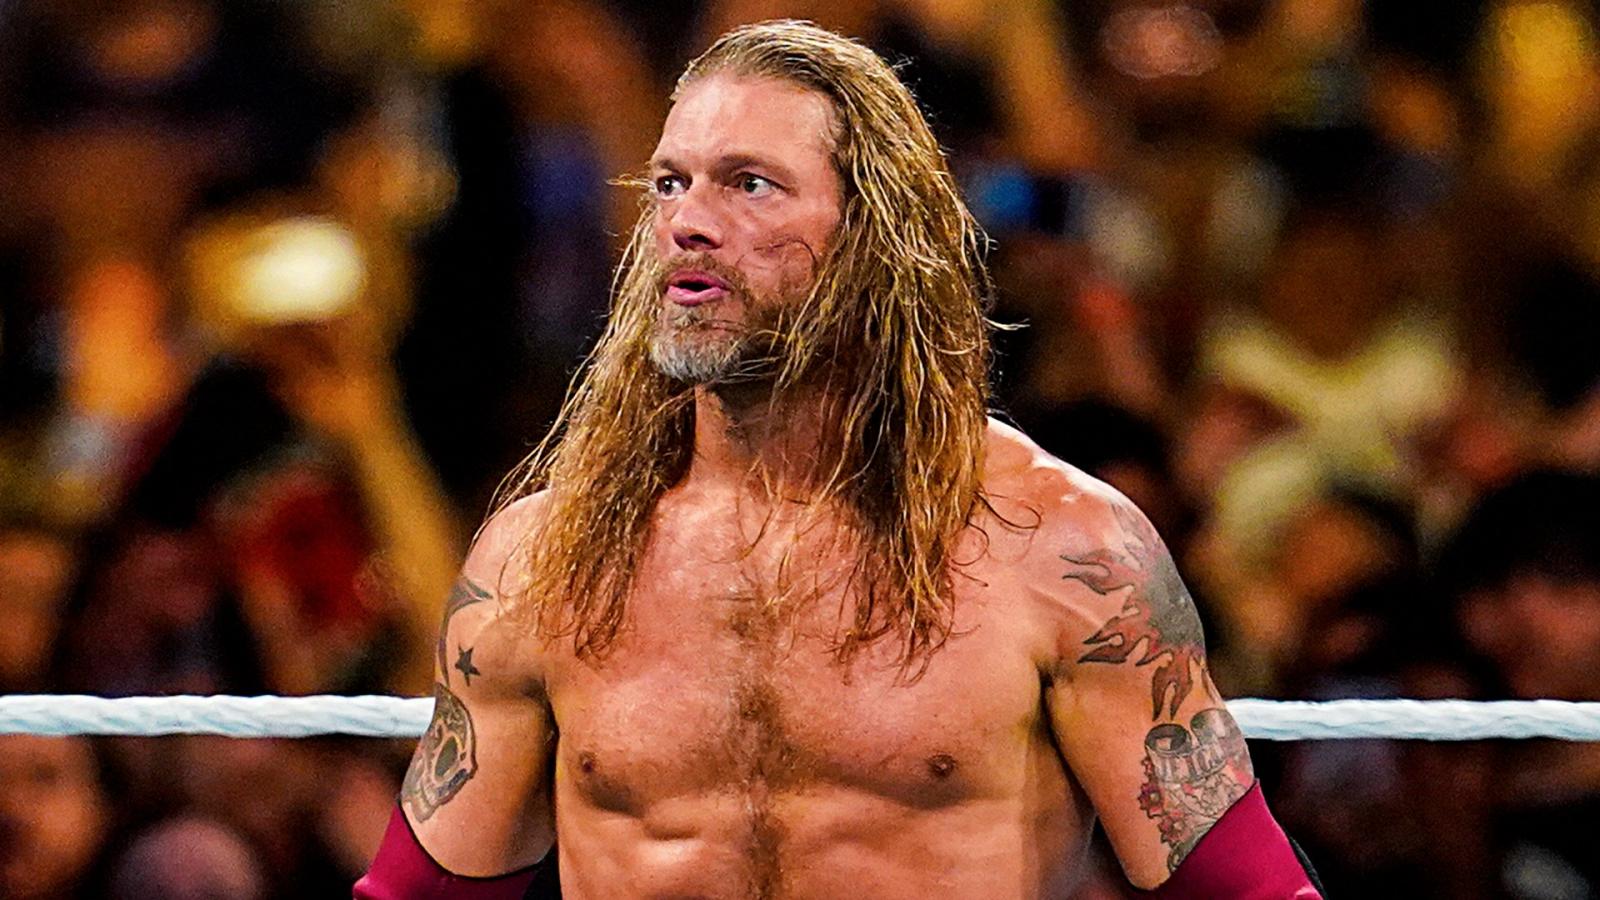 Edge Returns at the Royal Rumble, Will Be an Active Wrestler Going